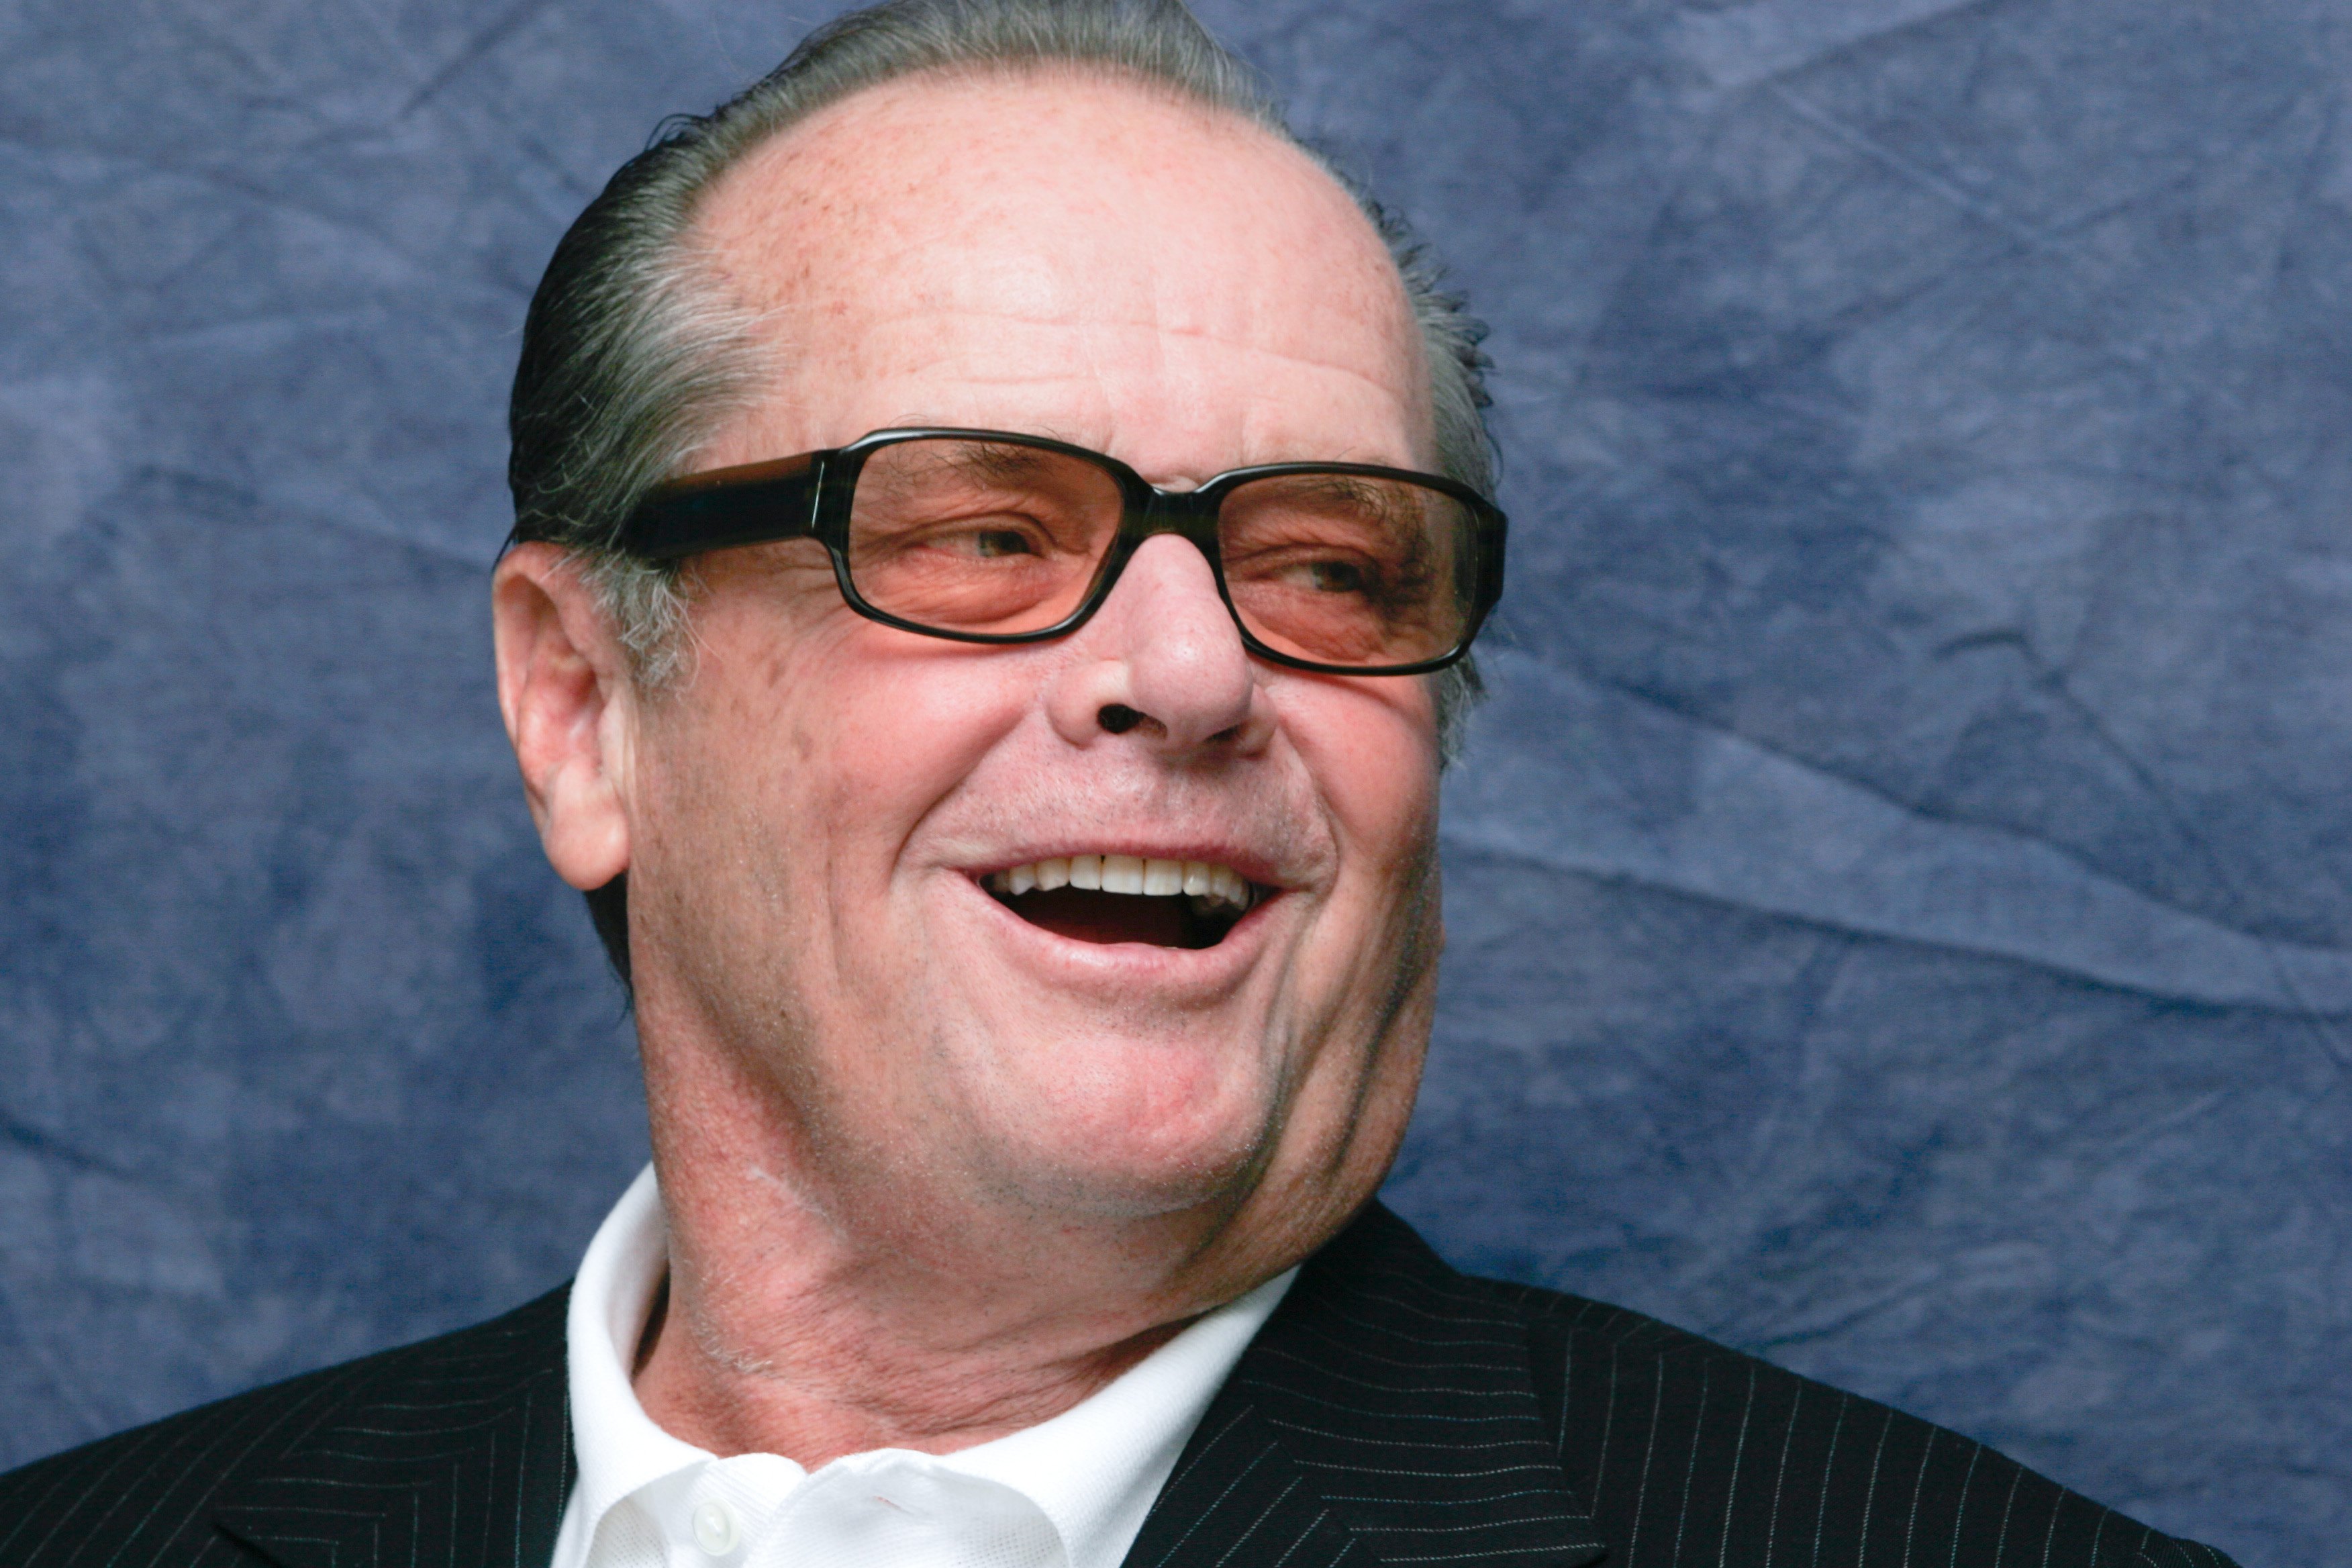 Jack Nicholson in California in 2007 | Source: Getty Images